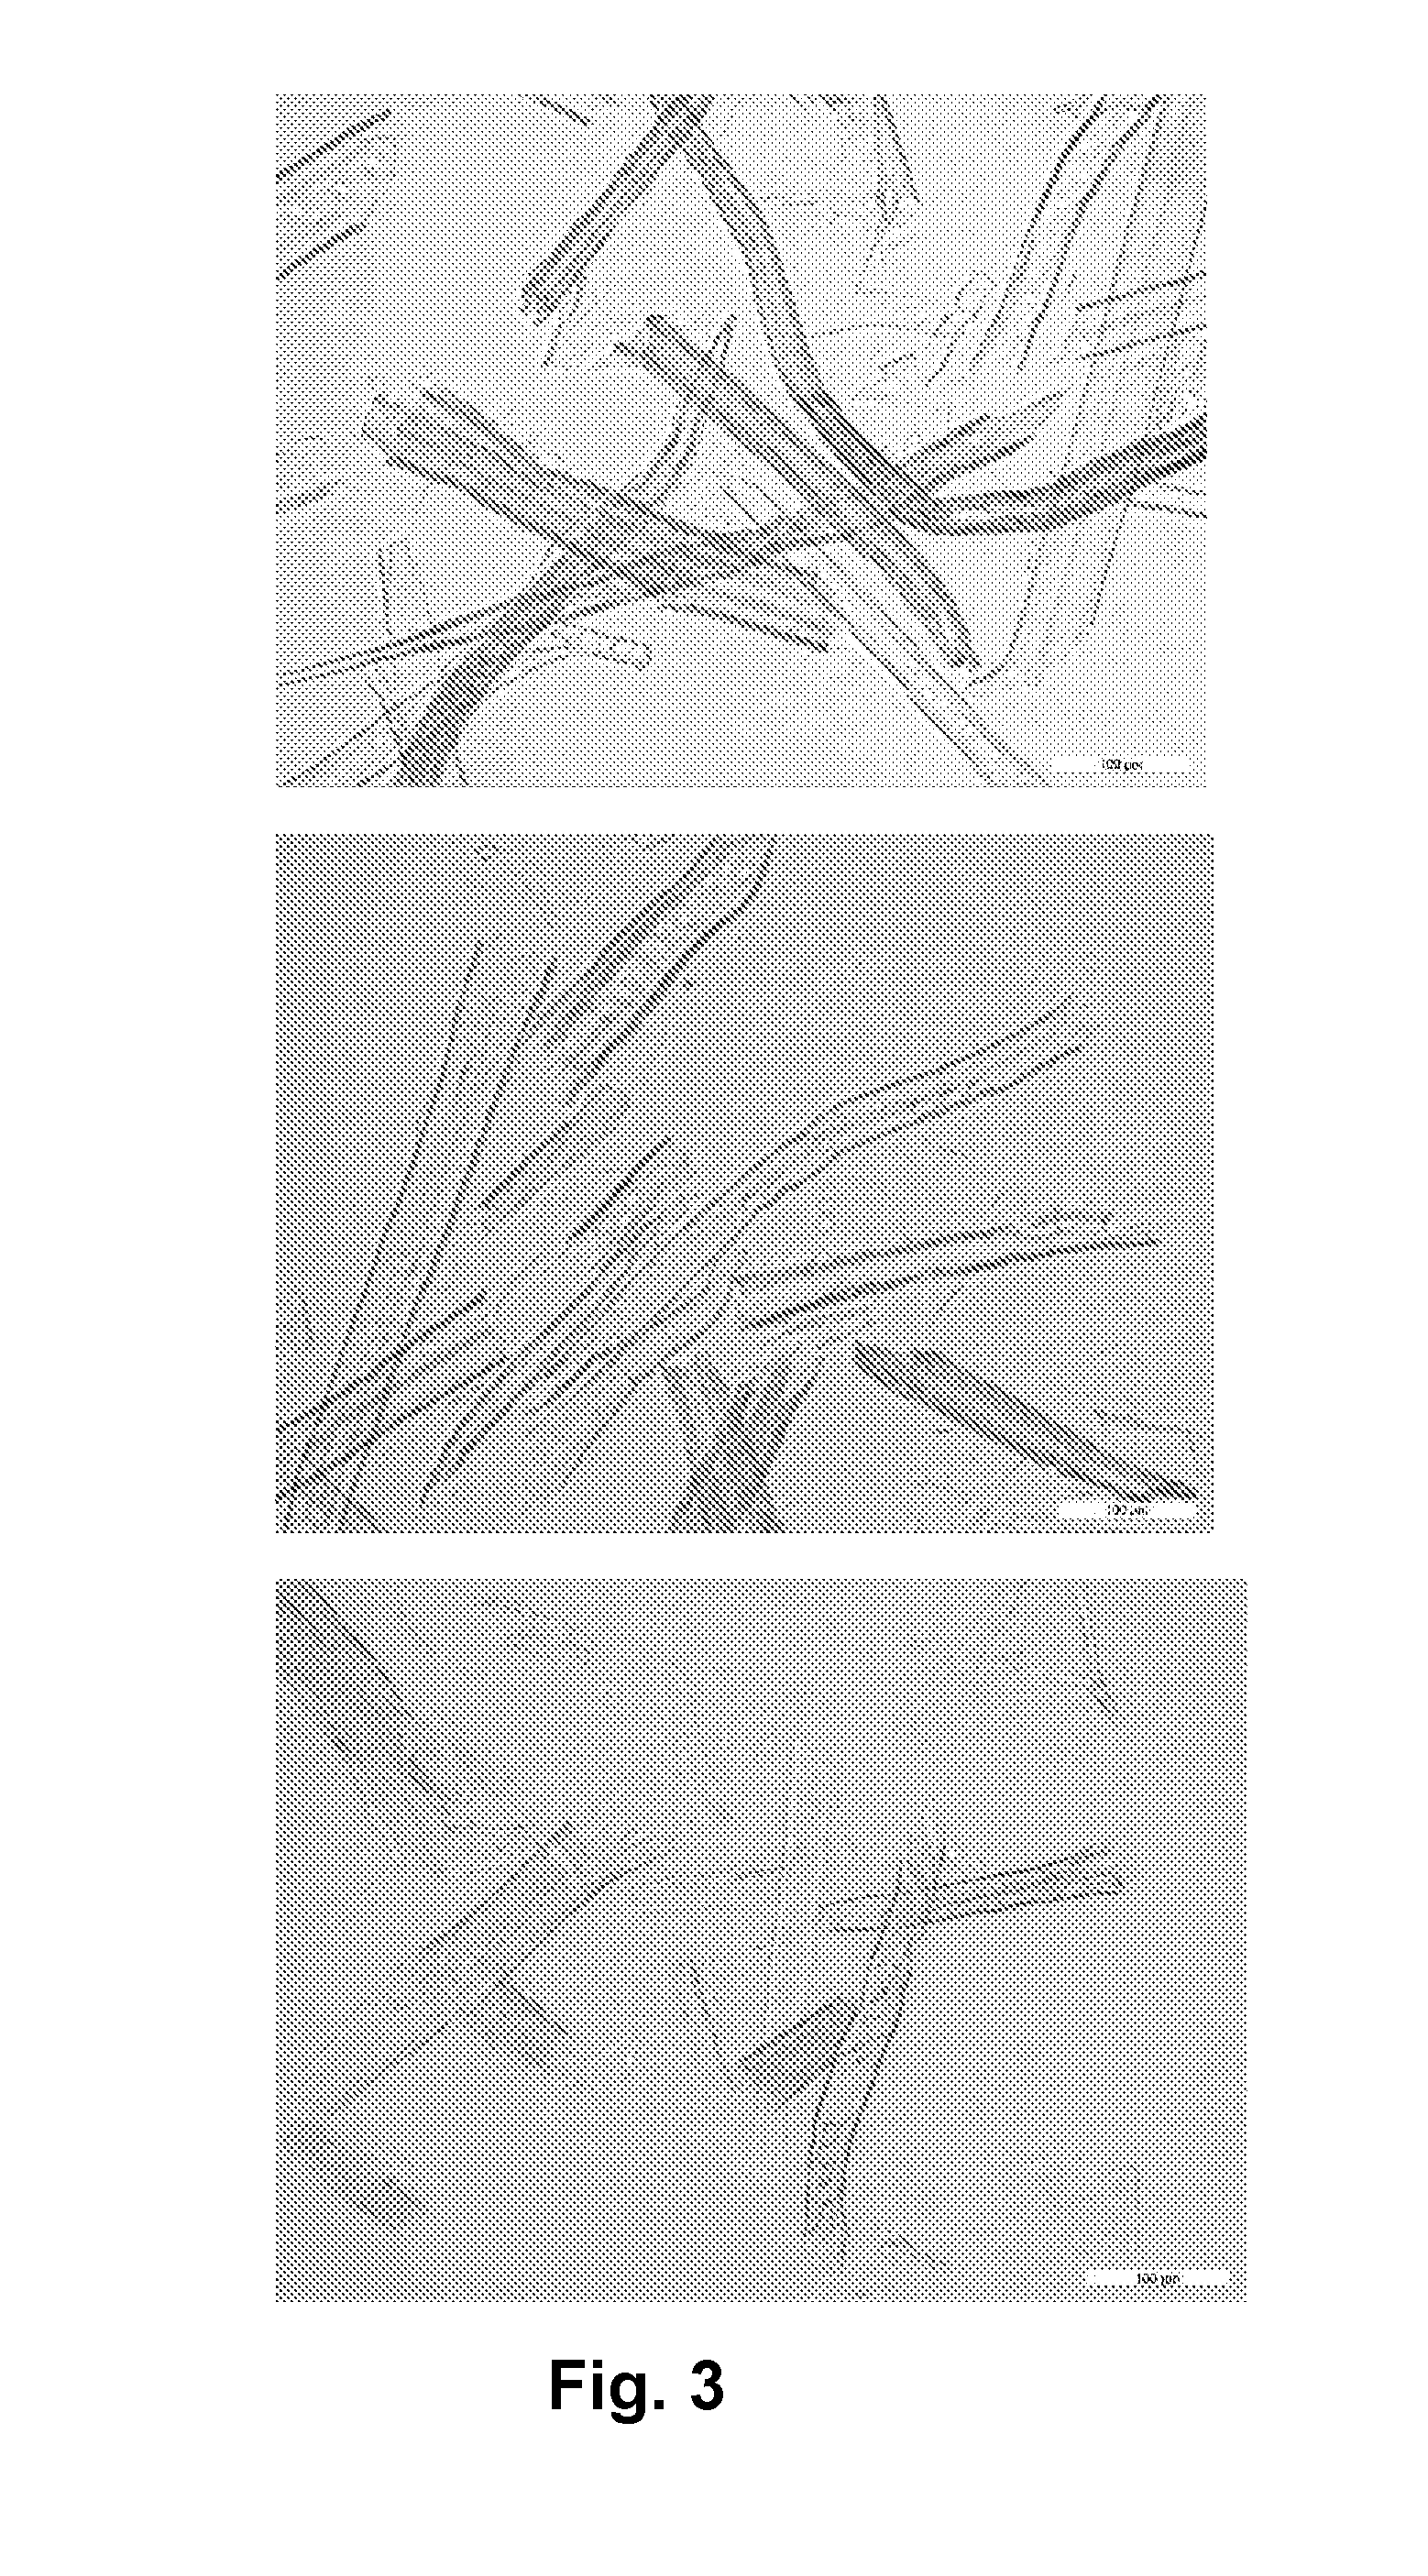 A method of producing oxidized or microfibrillated cellulose